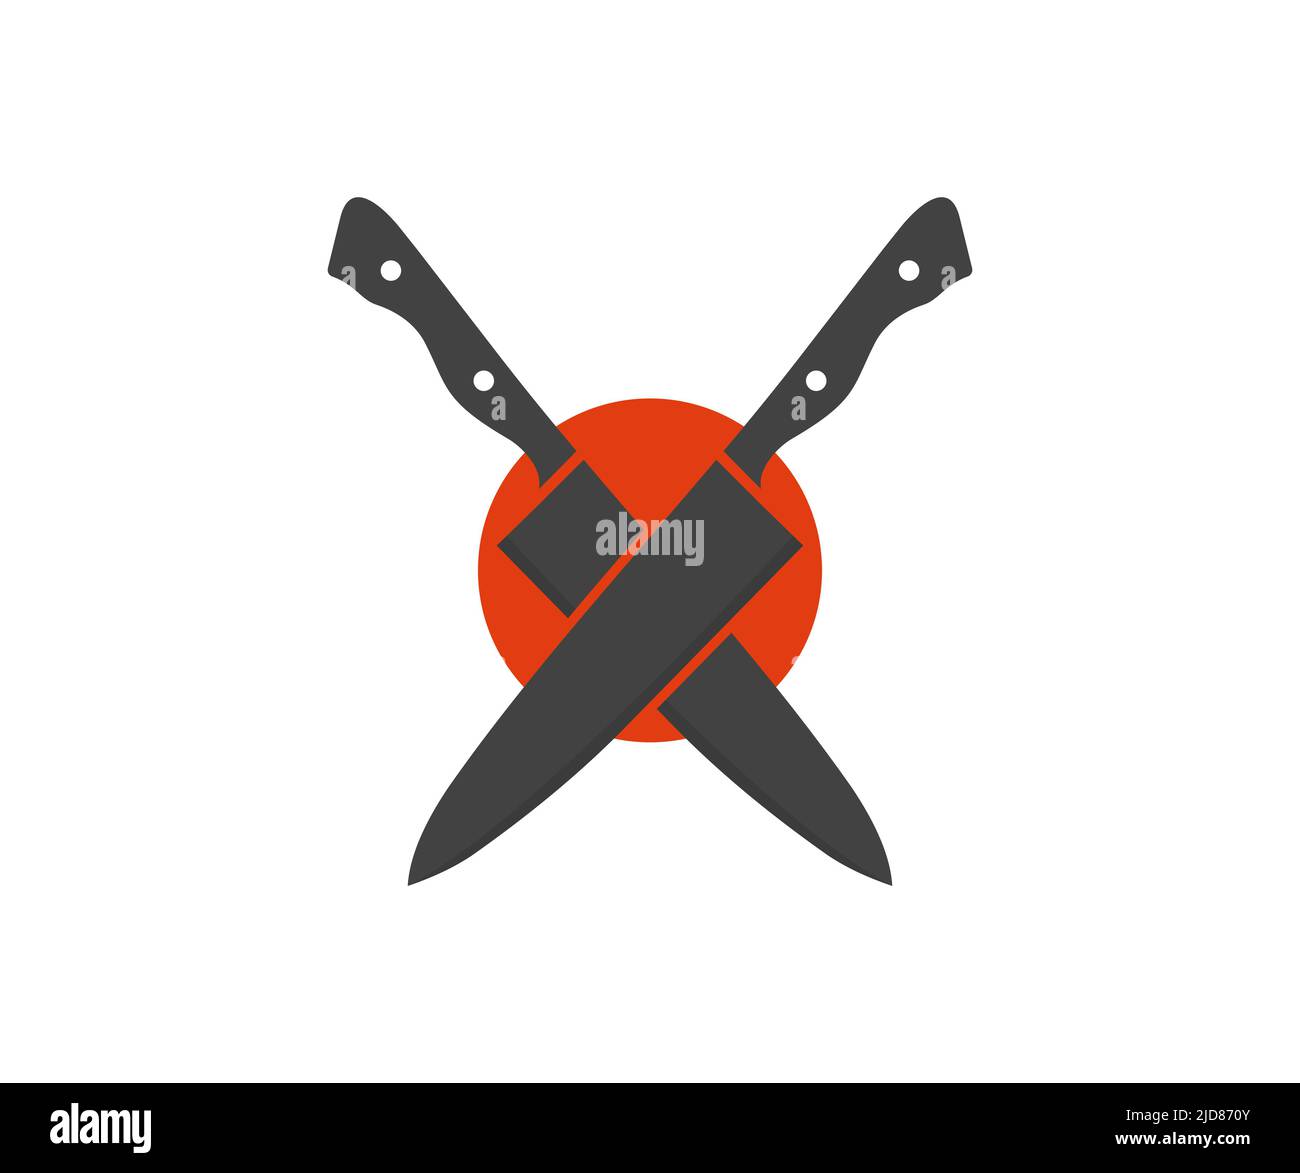 Chef's kitchen knife, The knife is sharp Used for cooking and is an essential equipment for chefs logo design. Chopper Knife symbol vector design. Stock Vector